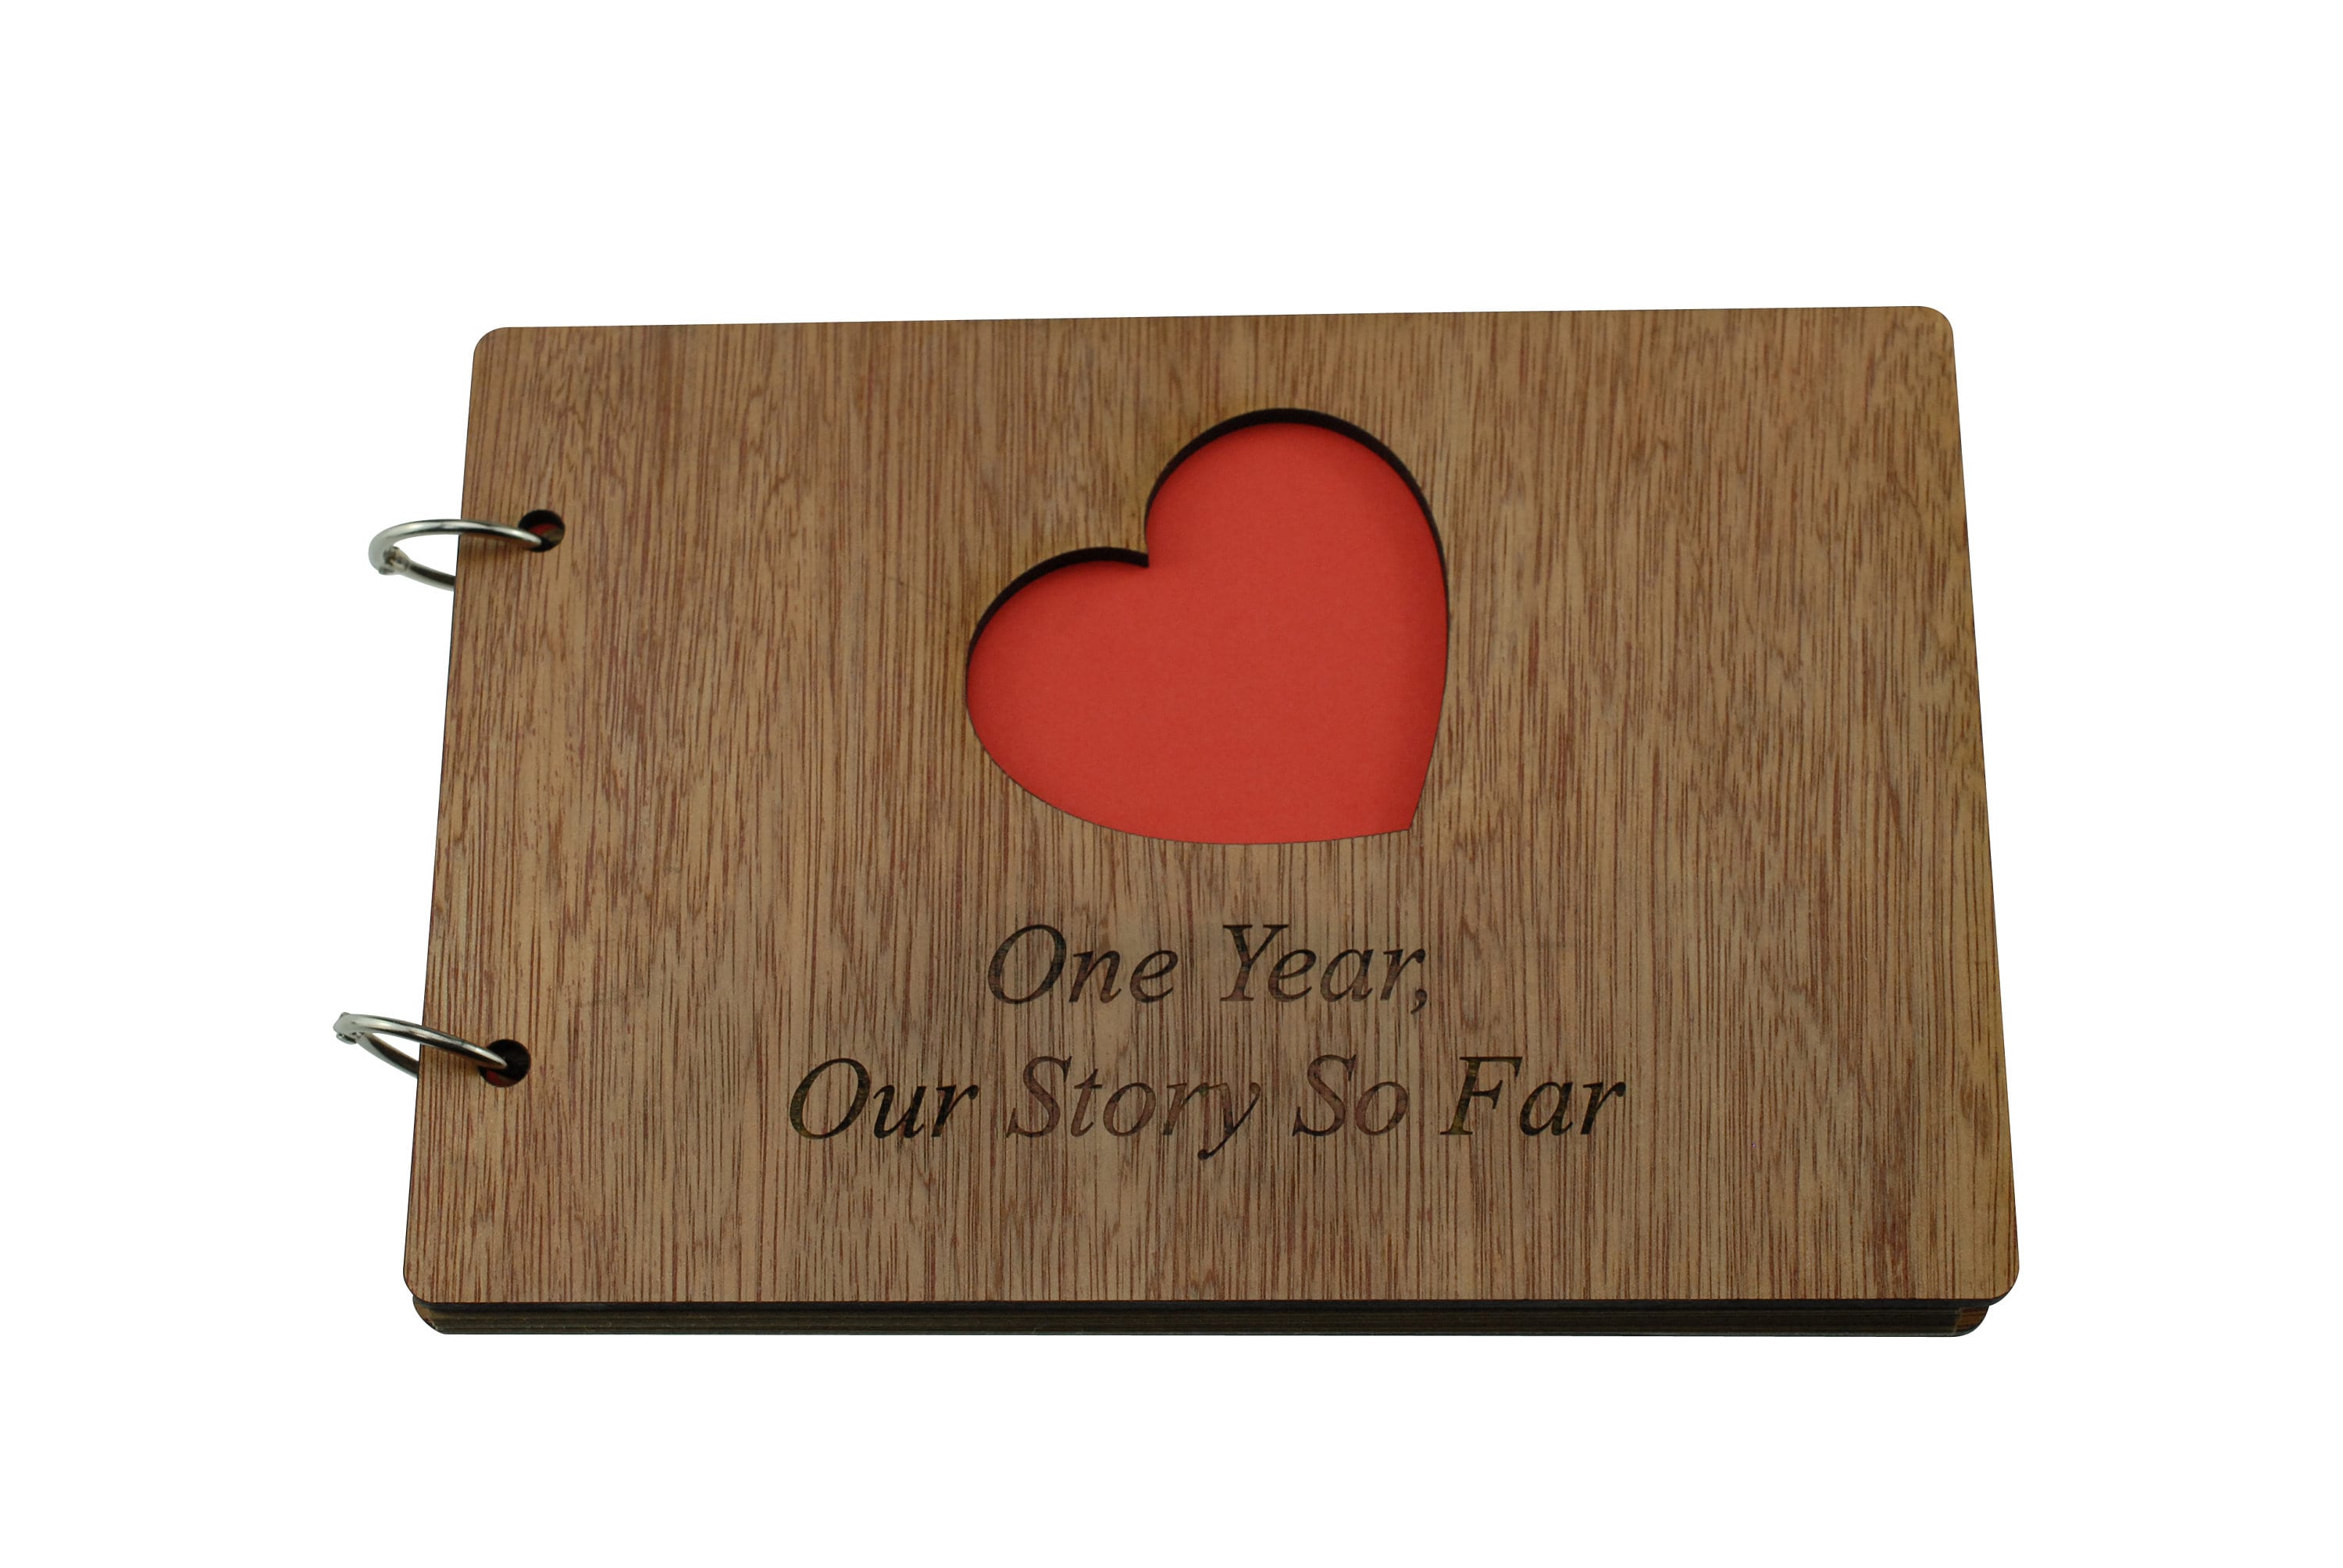 8. "Our Story So Far" Scrapbook